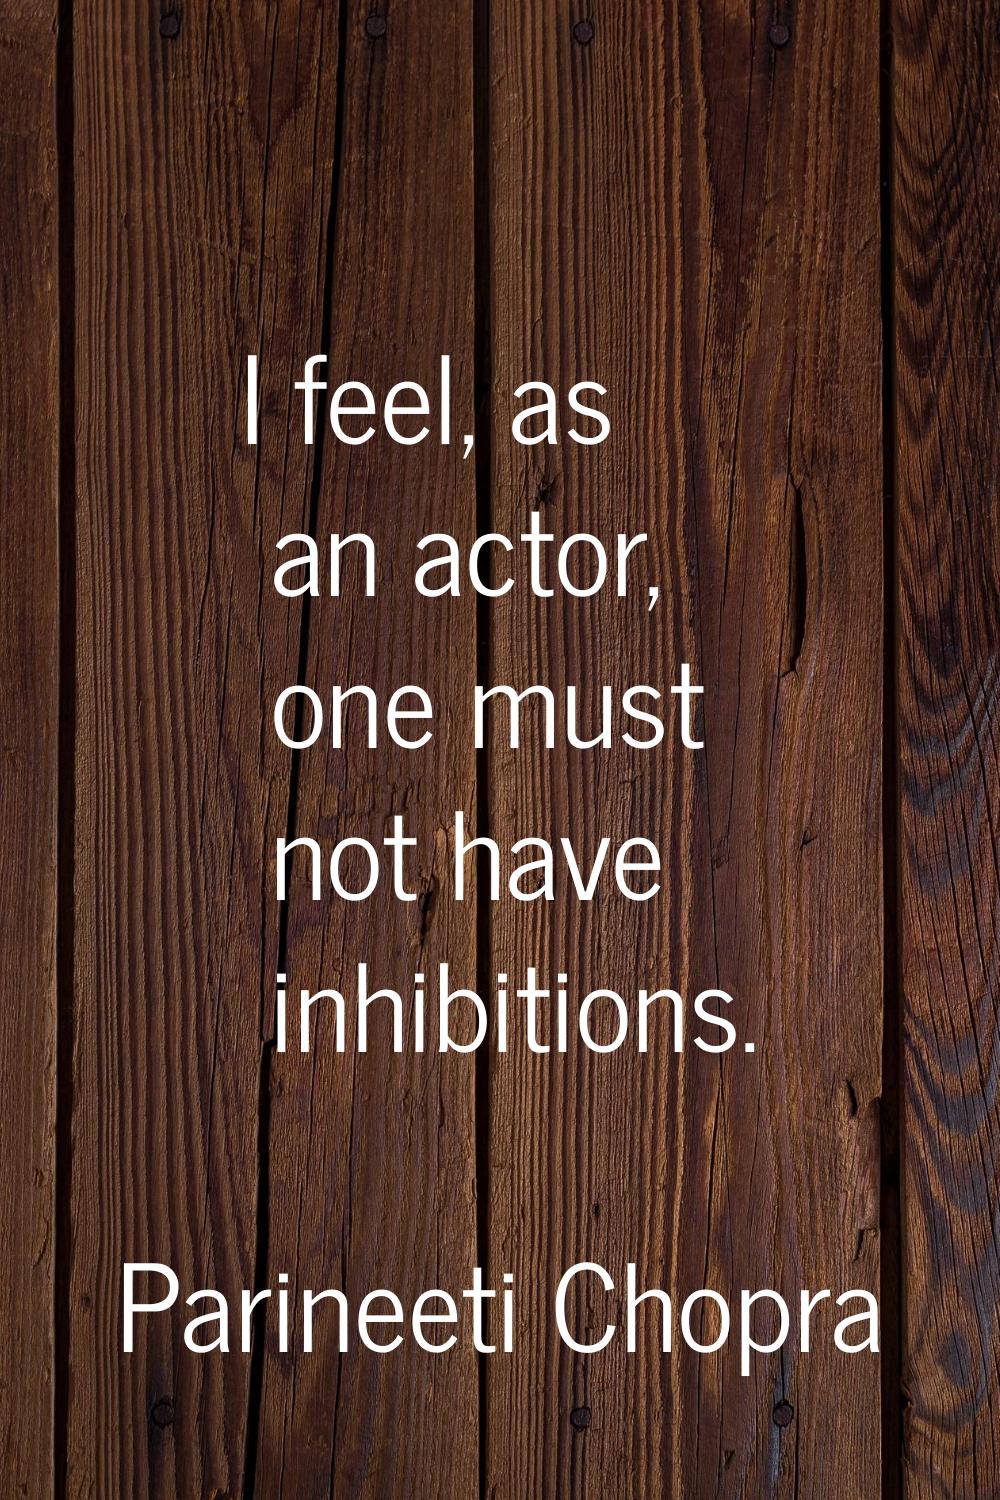 I feel, as an actor, one must not have inhibitions.